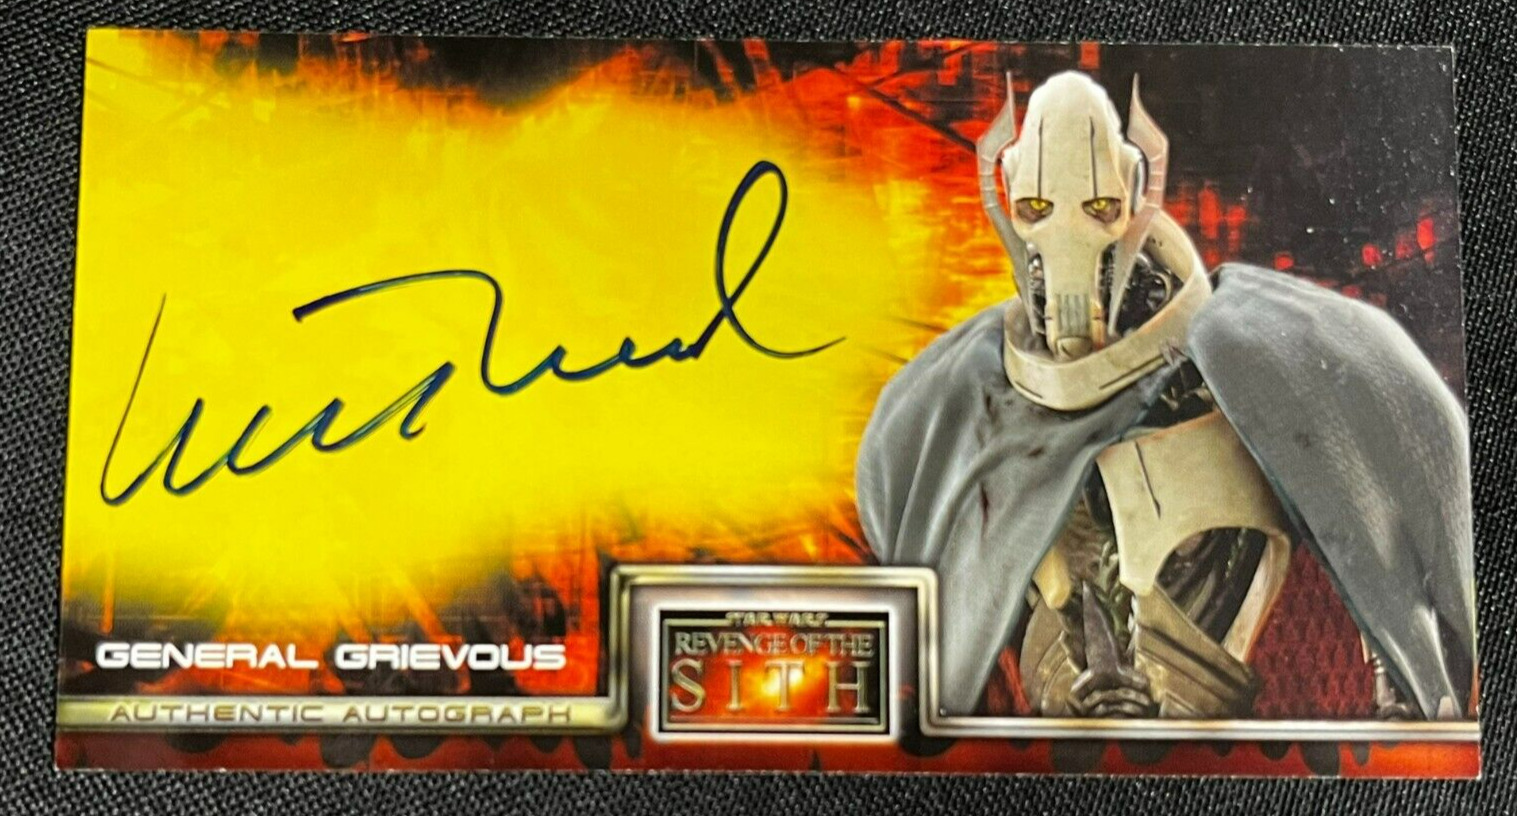 2005 Topps Widevision Star Wars ROTS Mathew Wood Grievous autographed card (AA)